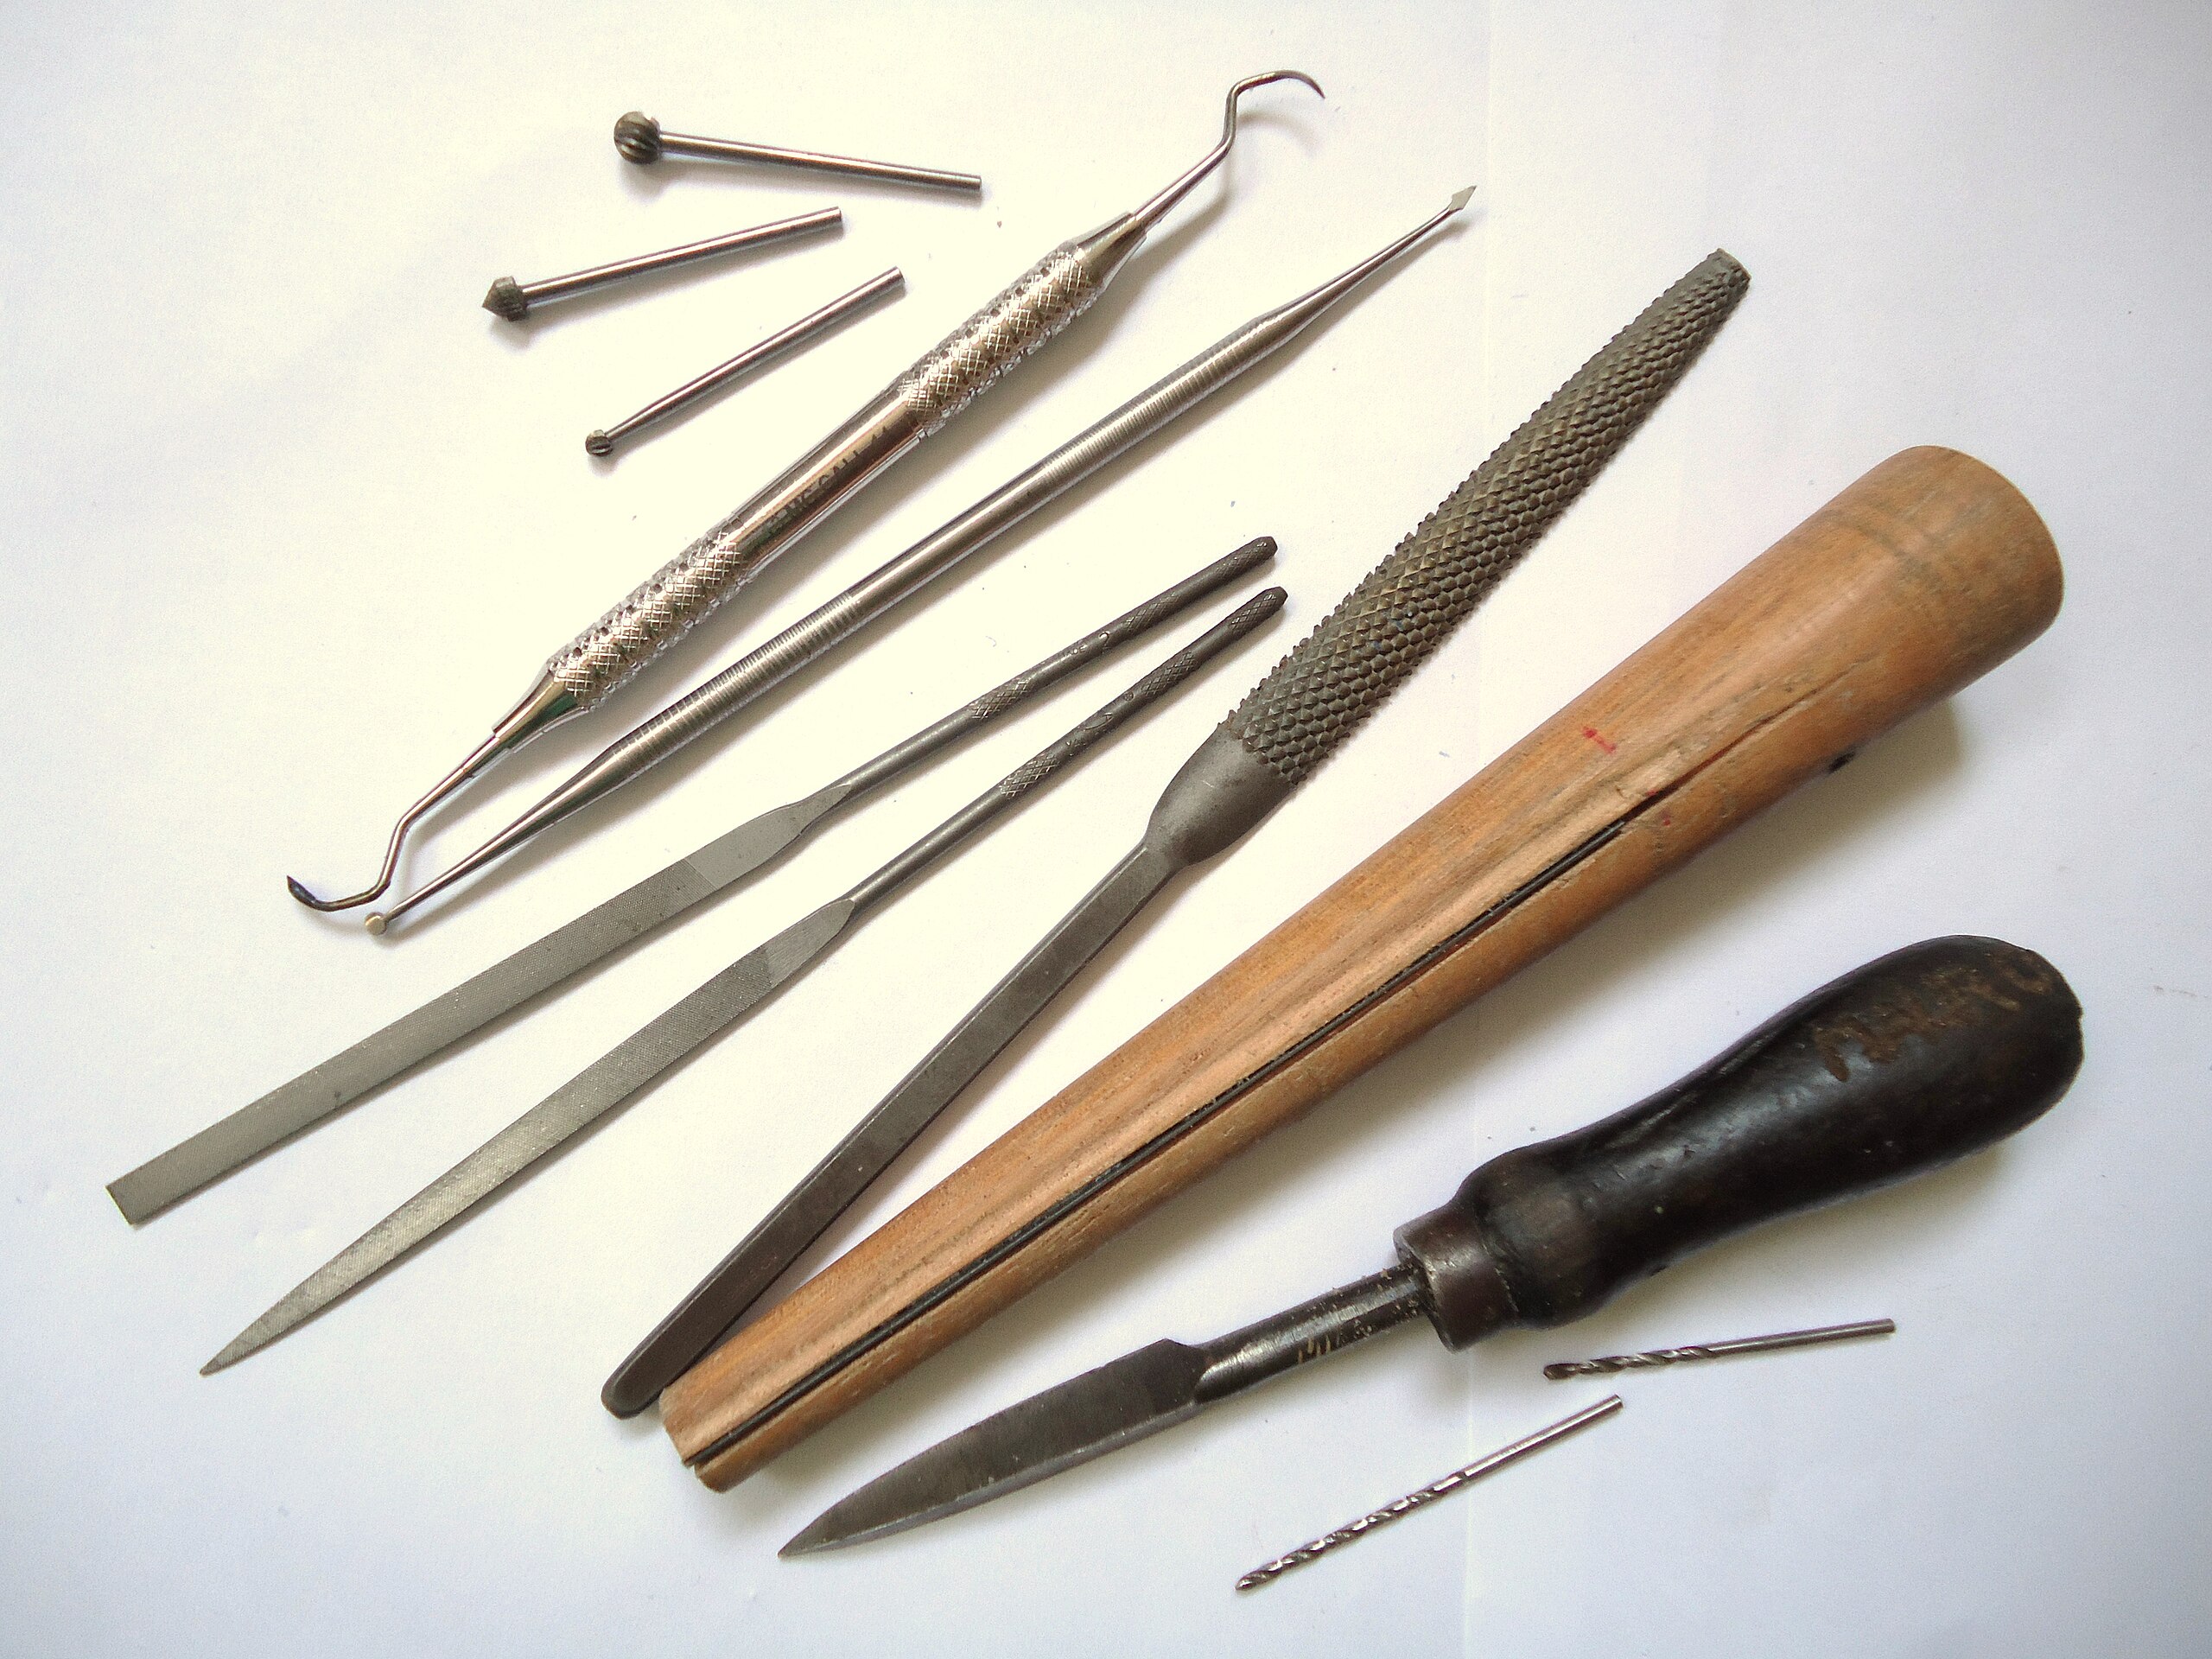 File:Tools for wax carving.JPG - Wikimedia Commons